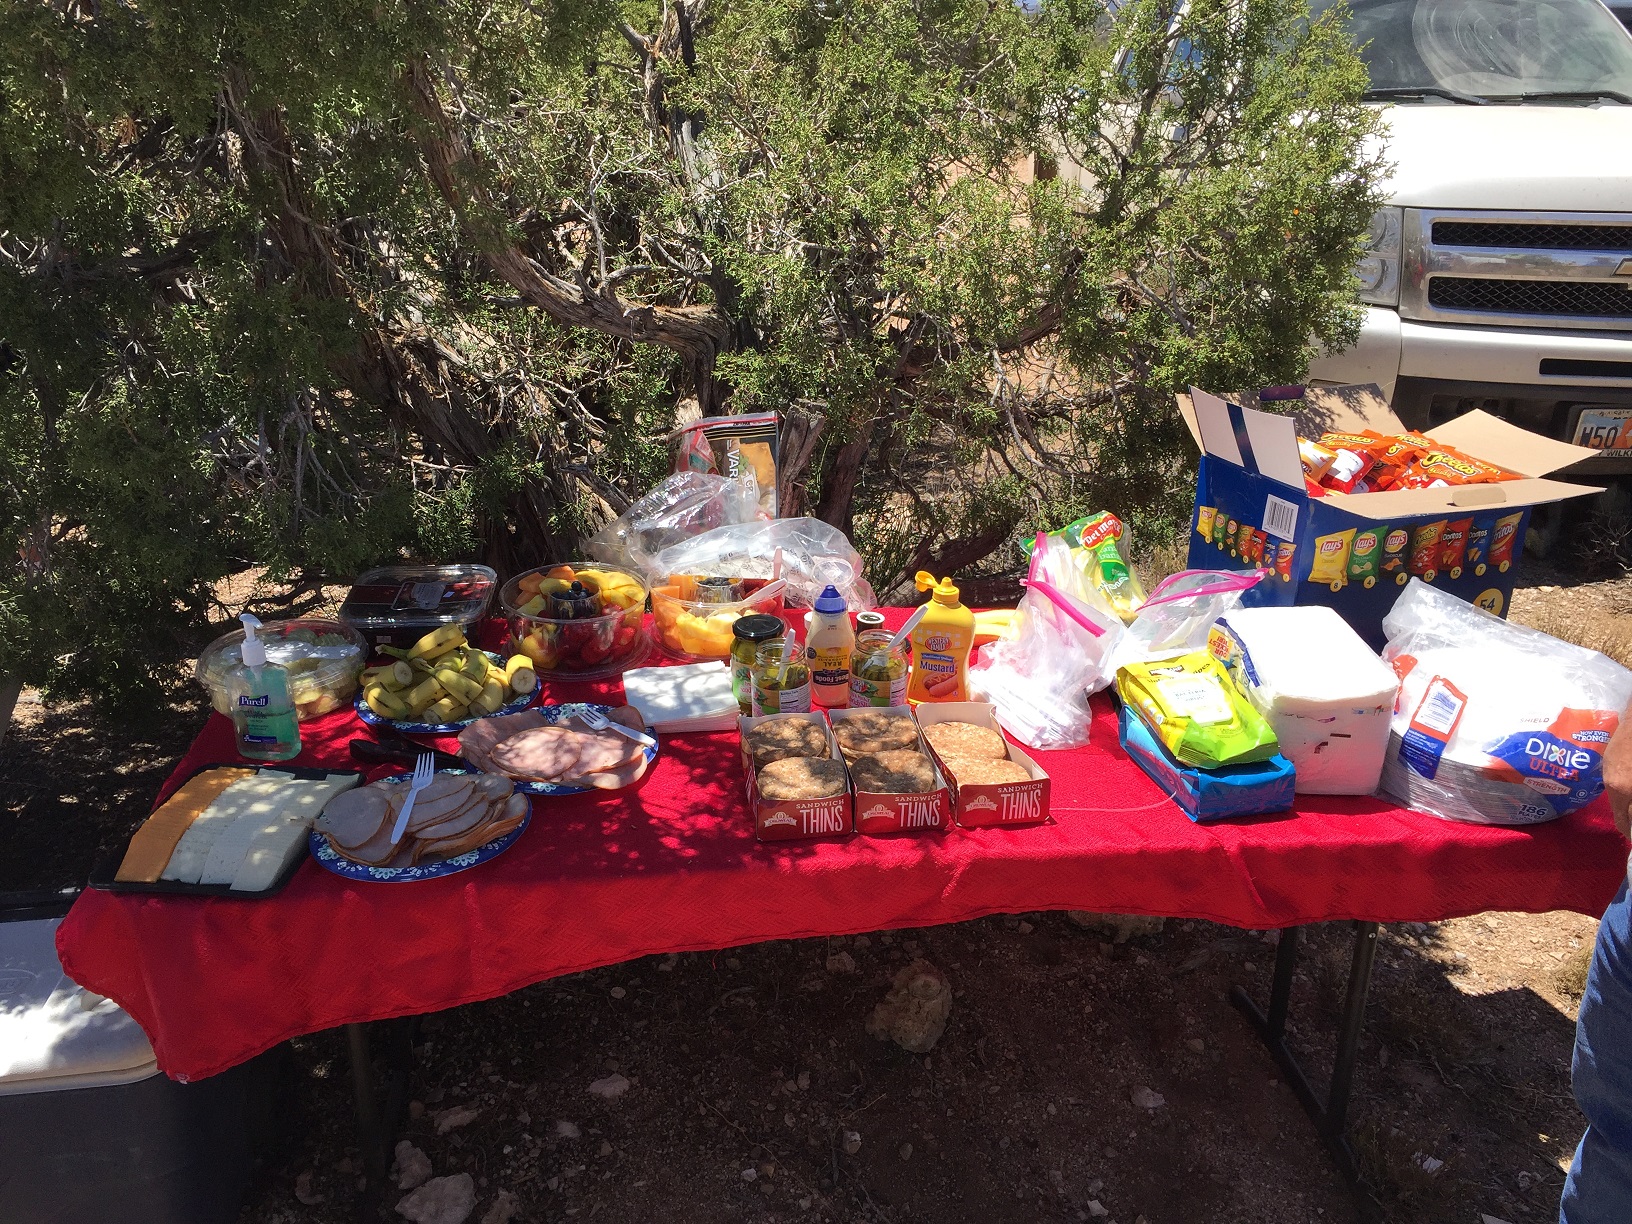 The DASIA field trip lunch being served at Kanab Point on the Arizona Strip